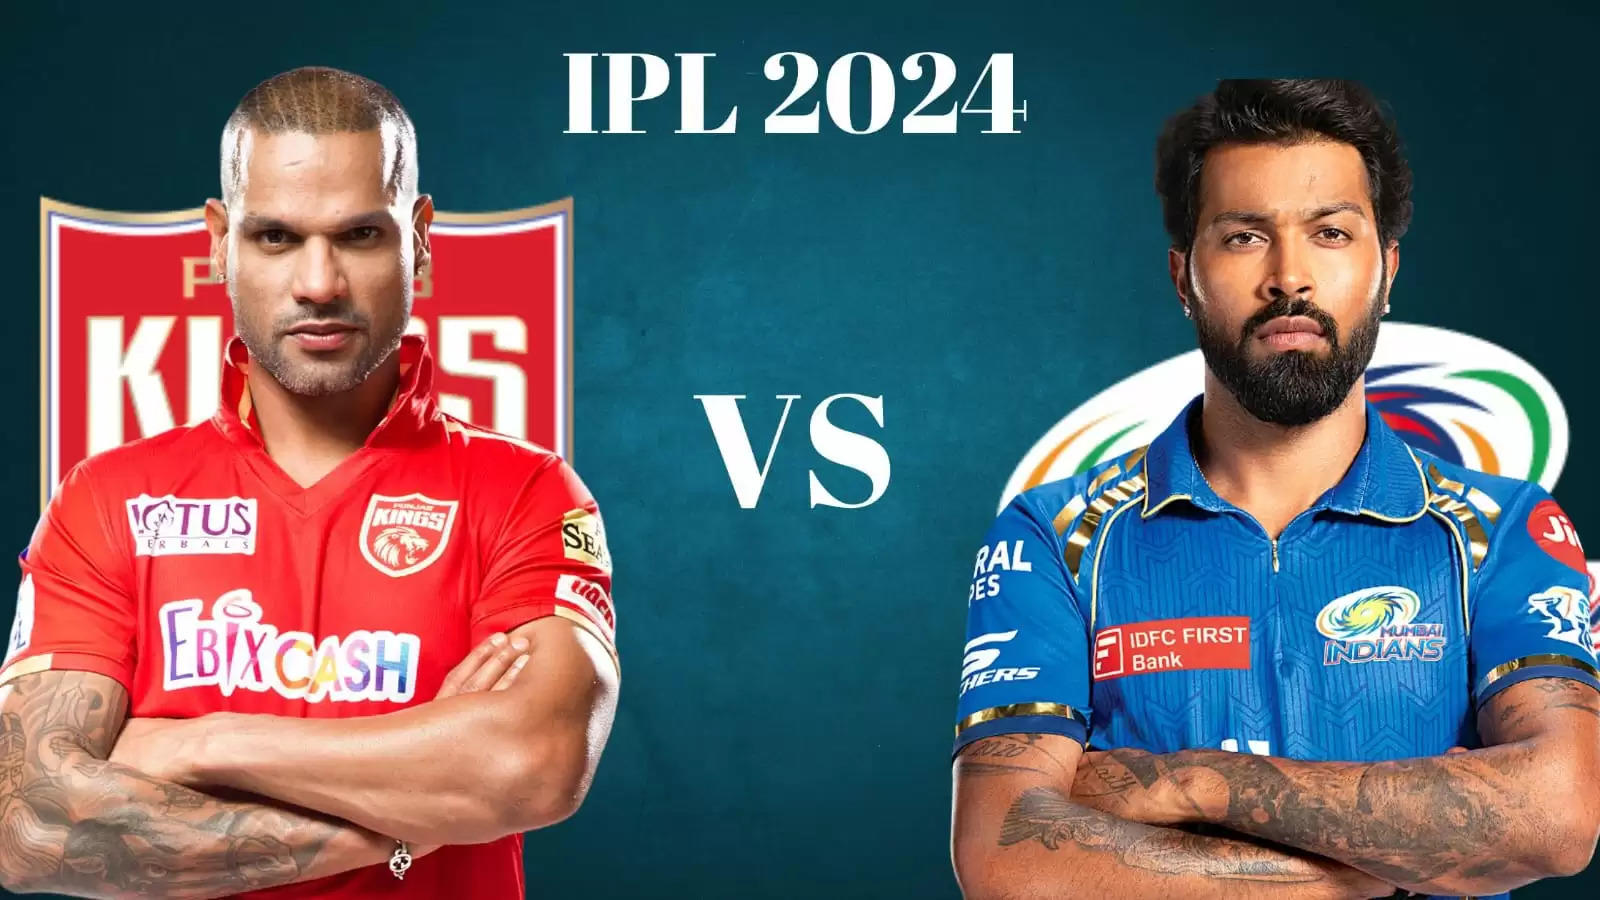 PBKS vs MI Dream11 Prediction Today Match 33: Playing XI, IPL 2024 Fantasy Cricket Tips, Punjab Kings vs Mumbai Indians Dream11 Team, Weather and Pitch Report, Injury Updates and Team News